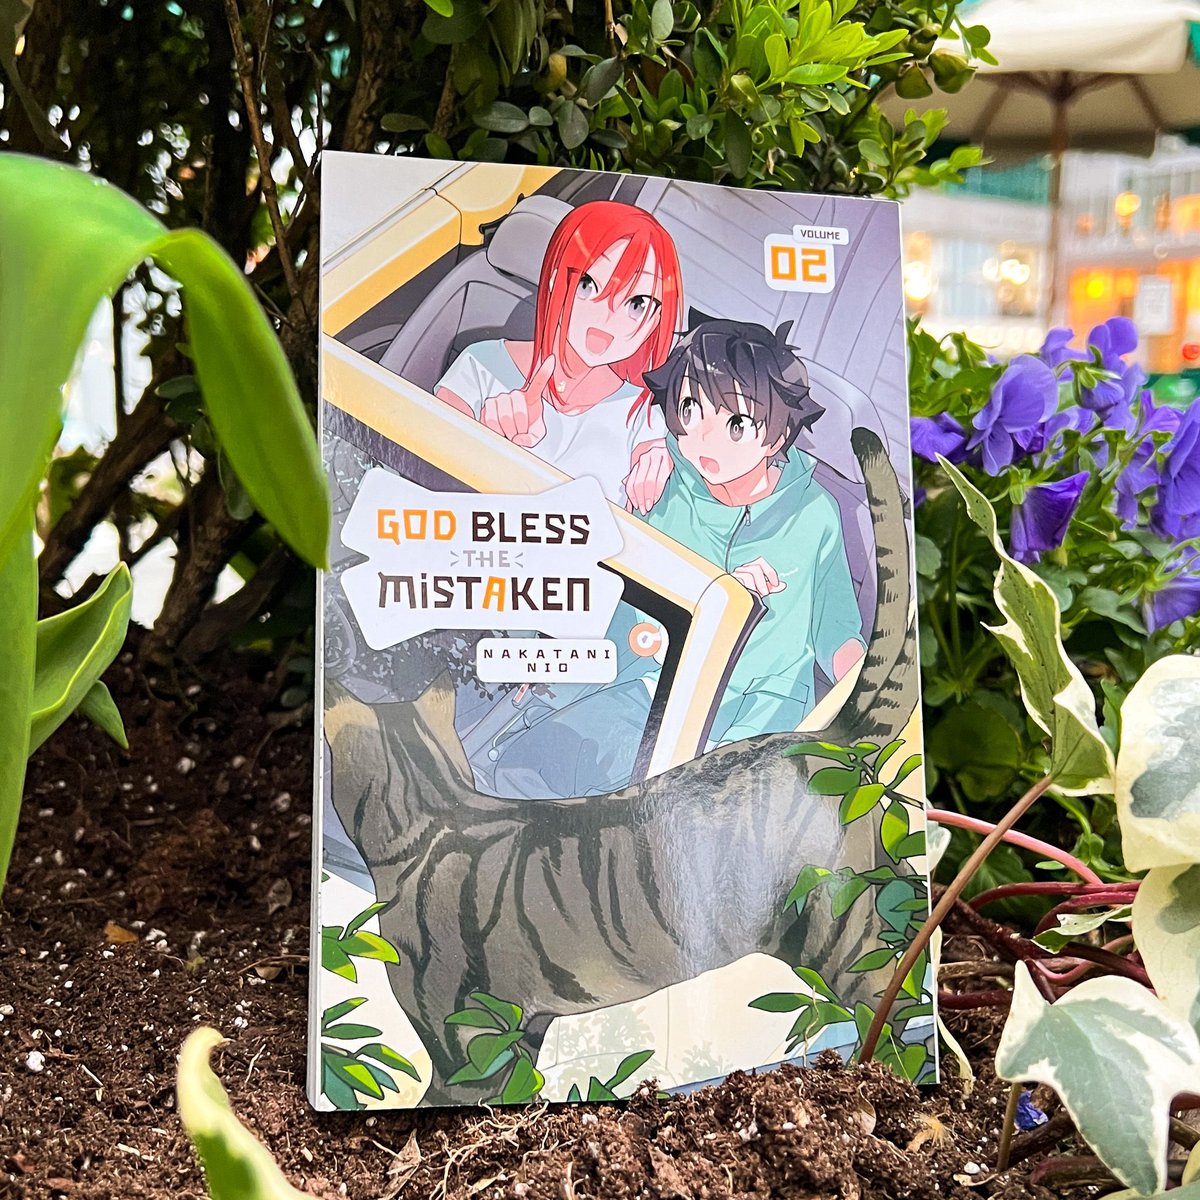 From houses becoming mazes to unbreakable objects, there's more fun to be had in the bug filled world of God Bless the Mistaken! 👾 Make sure to catch more bugs in God Bless the Mistaken, Vol. 2, available May 21 buff.ly/43pxr4w